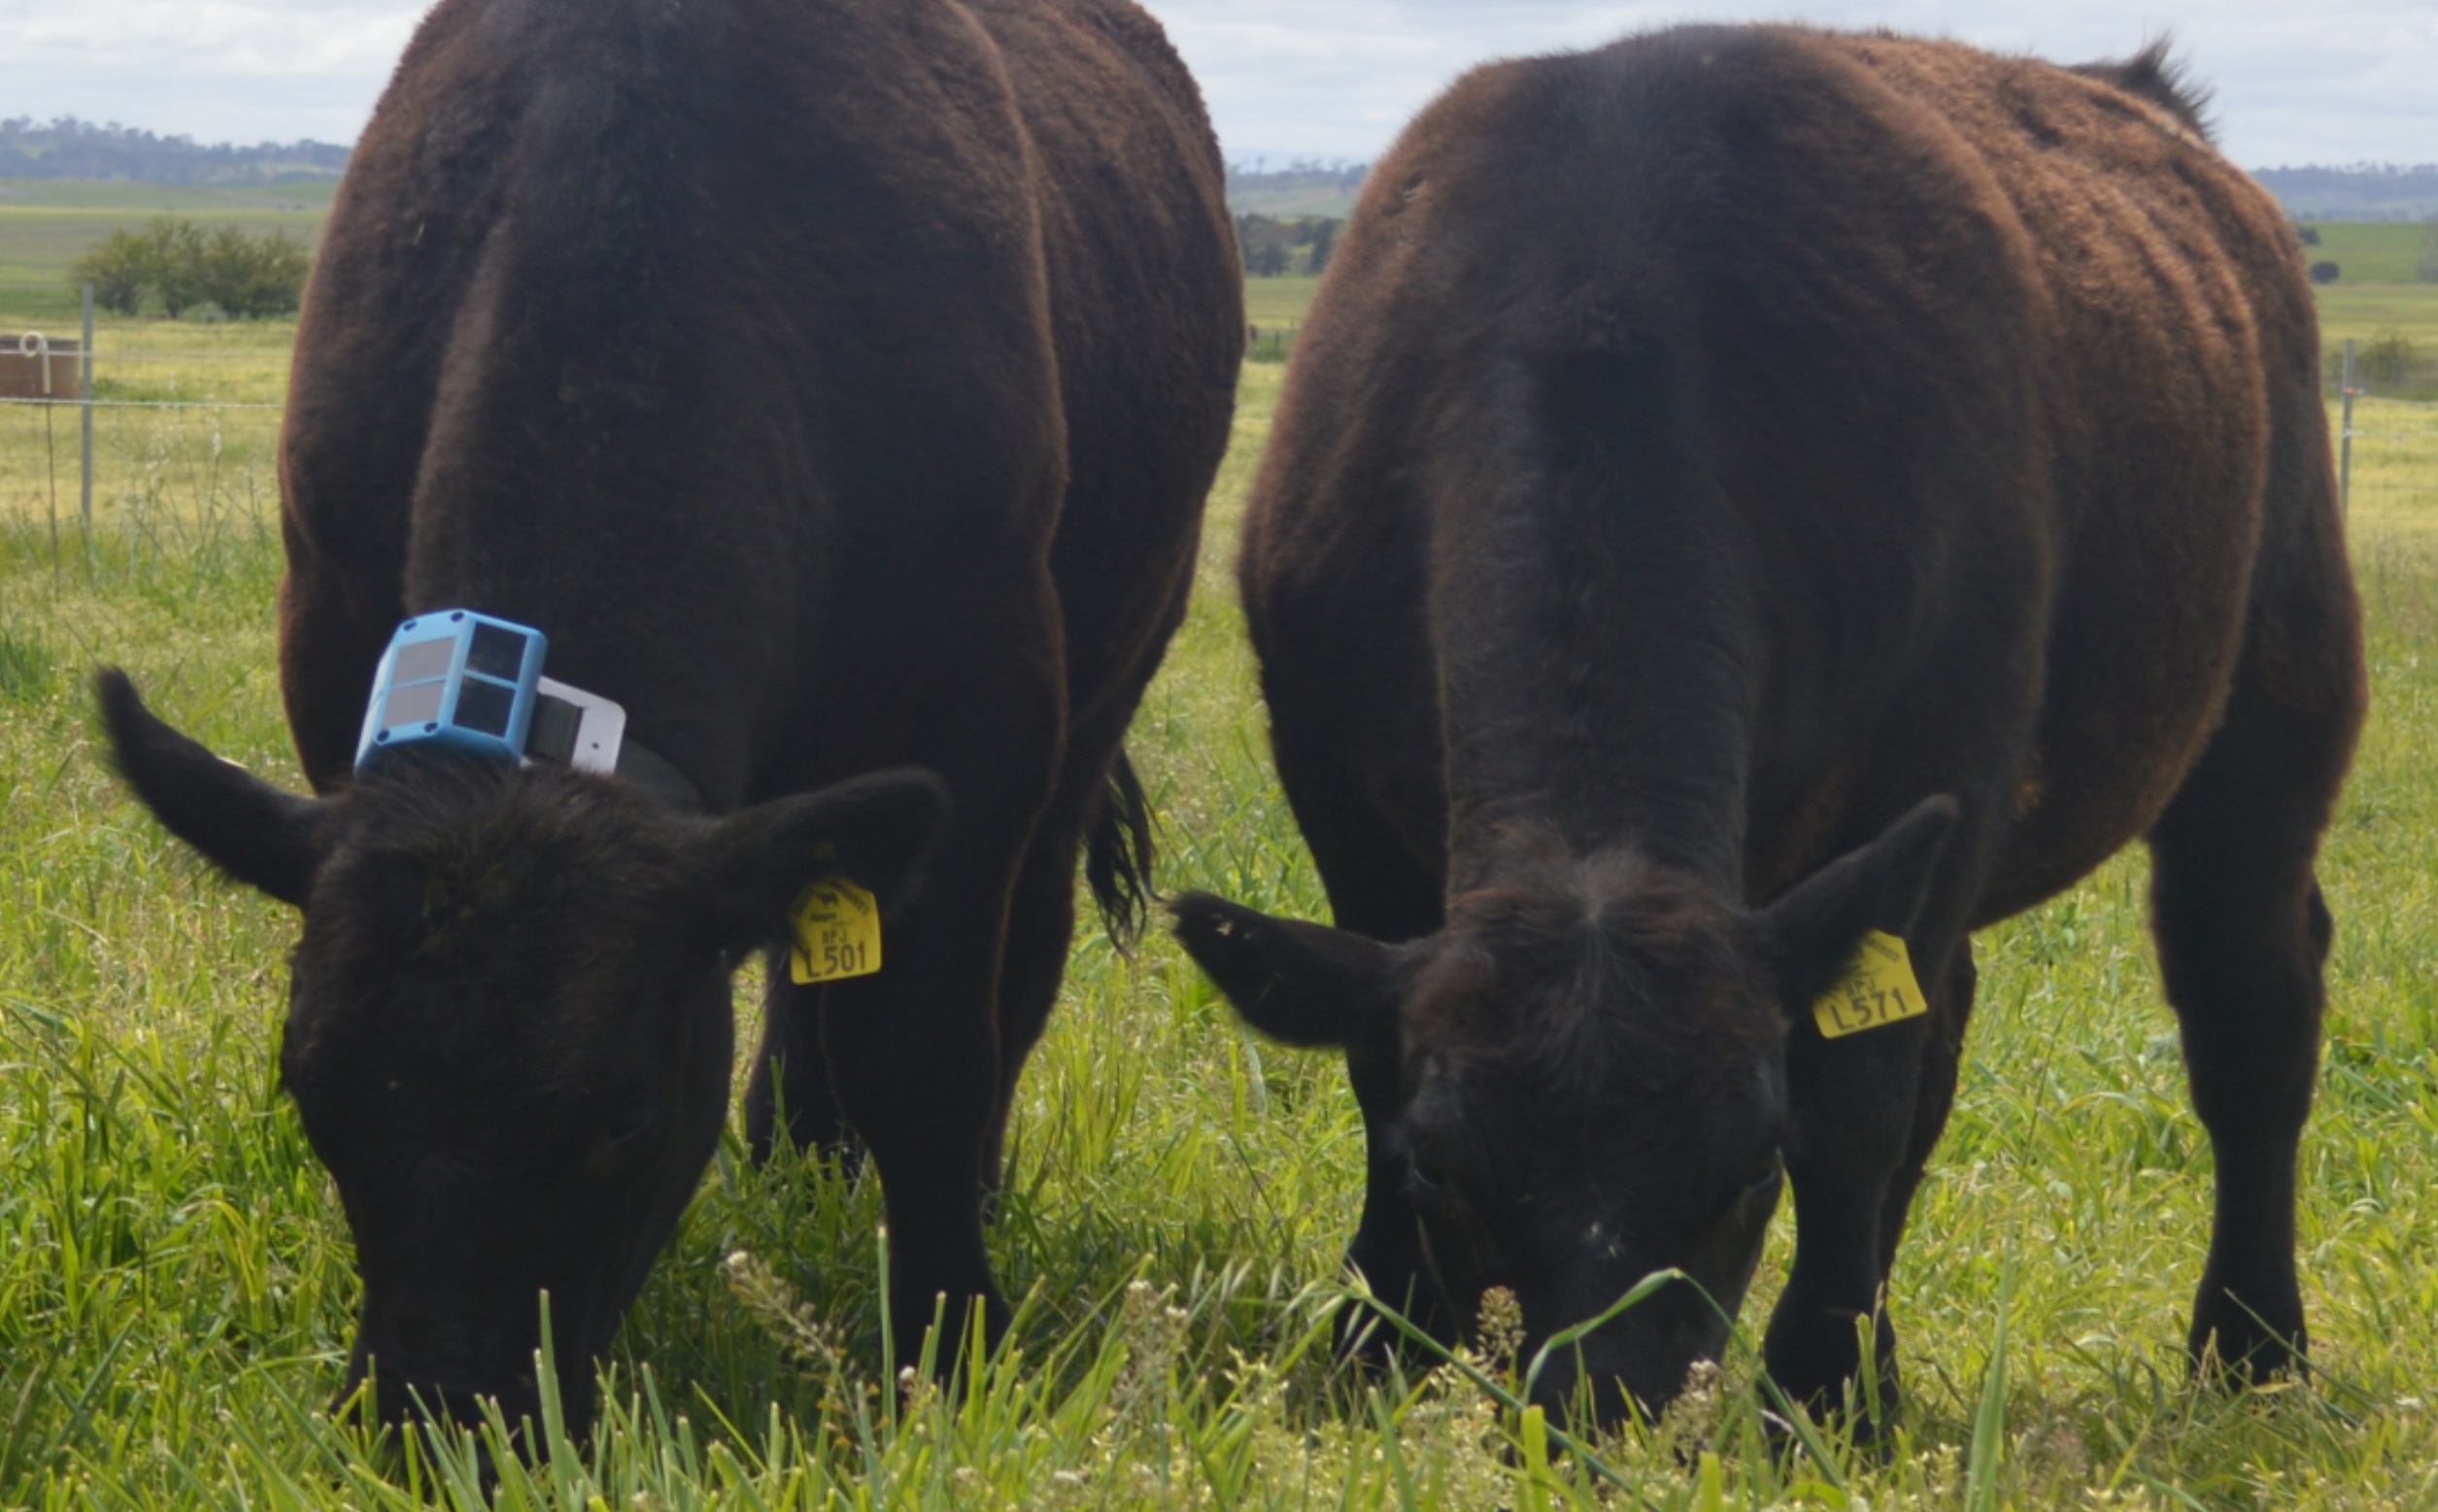 Grazing cattle, with eGrazor device fitted to an animal to the left of image.